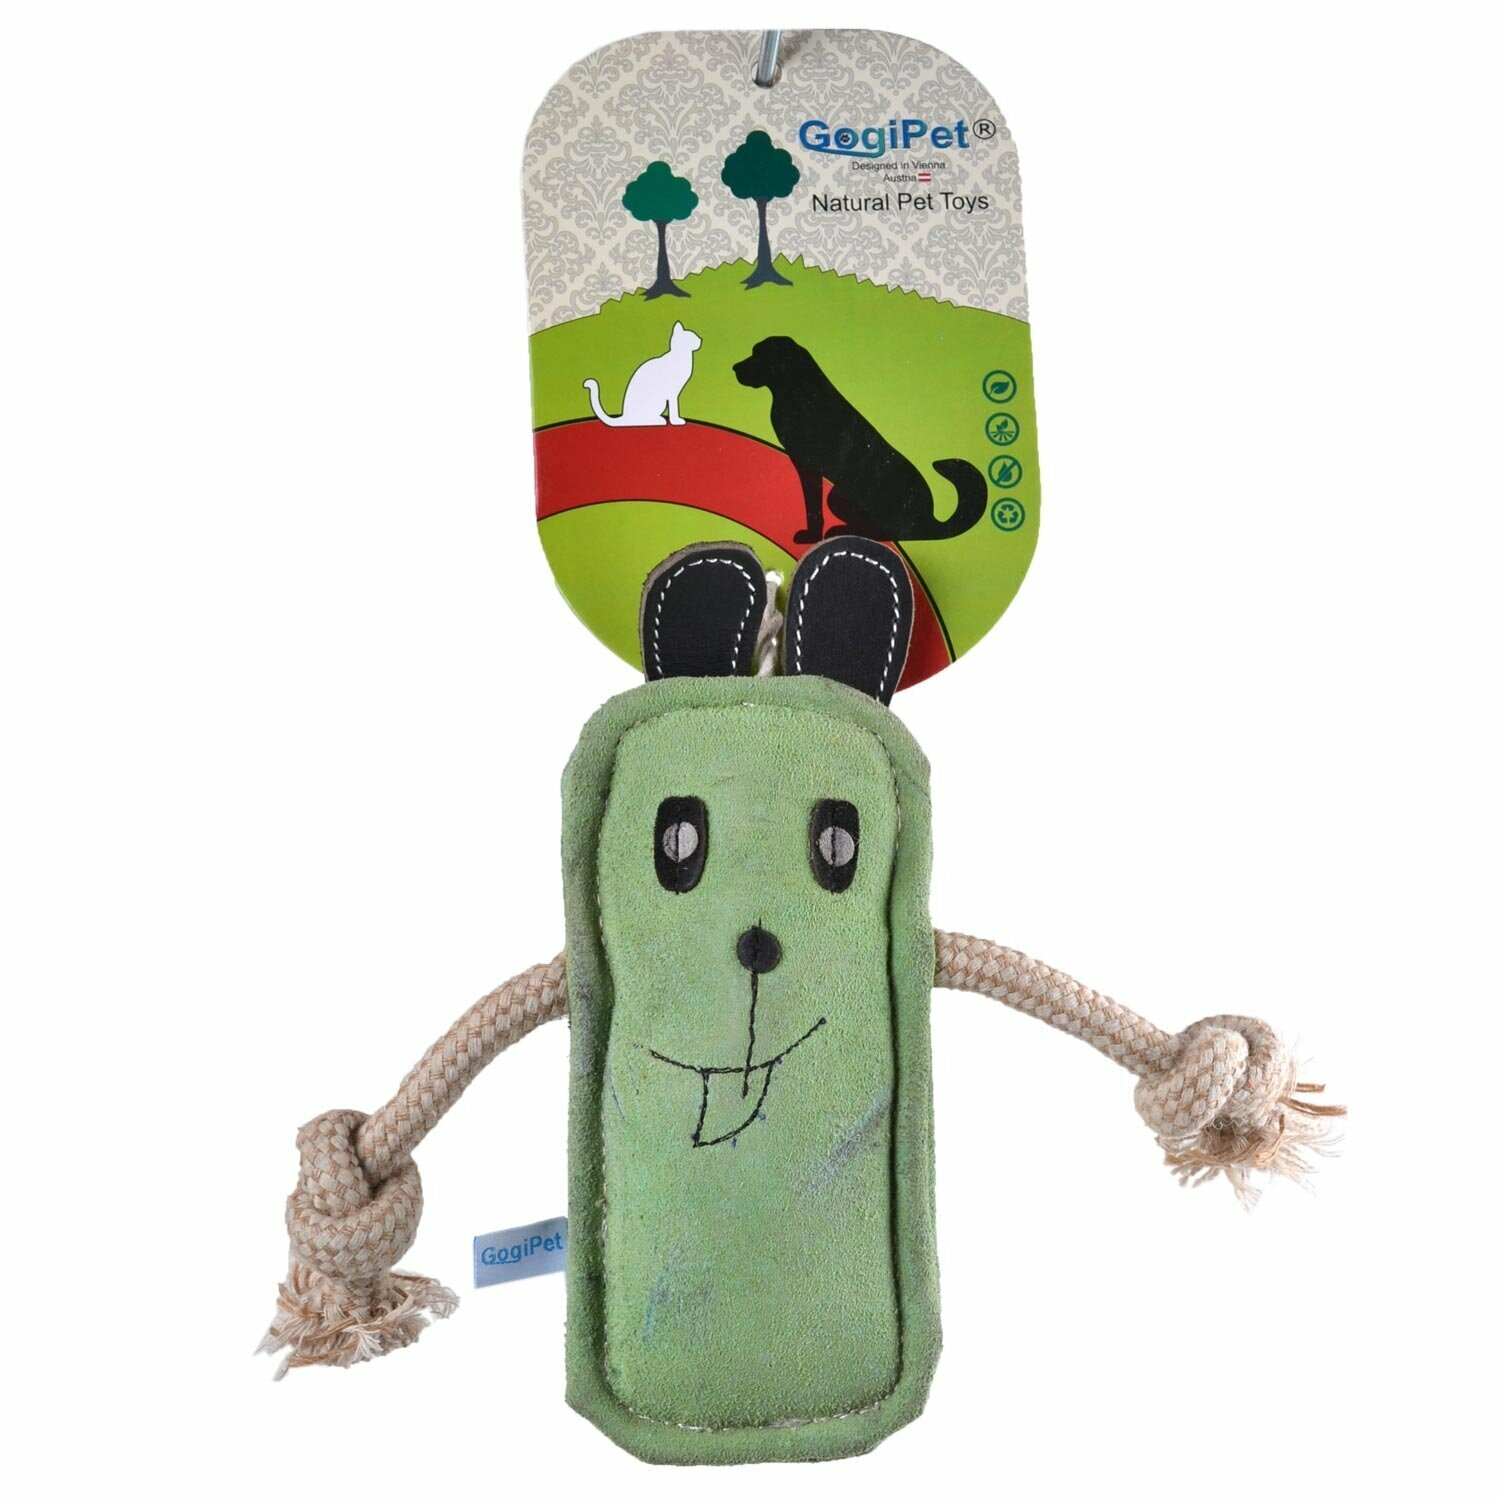 GogiPet dog toys made from sustainable raw materials